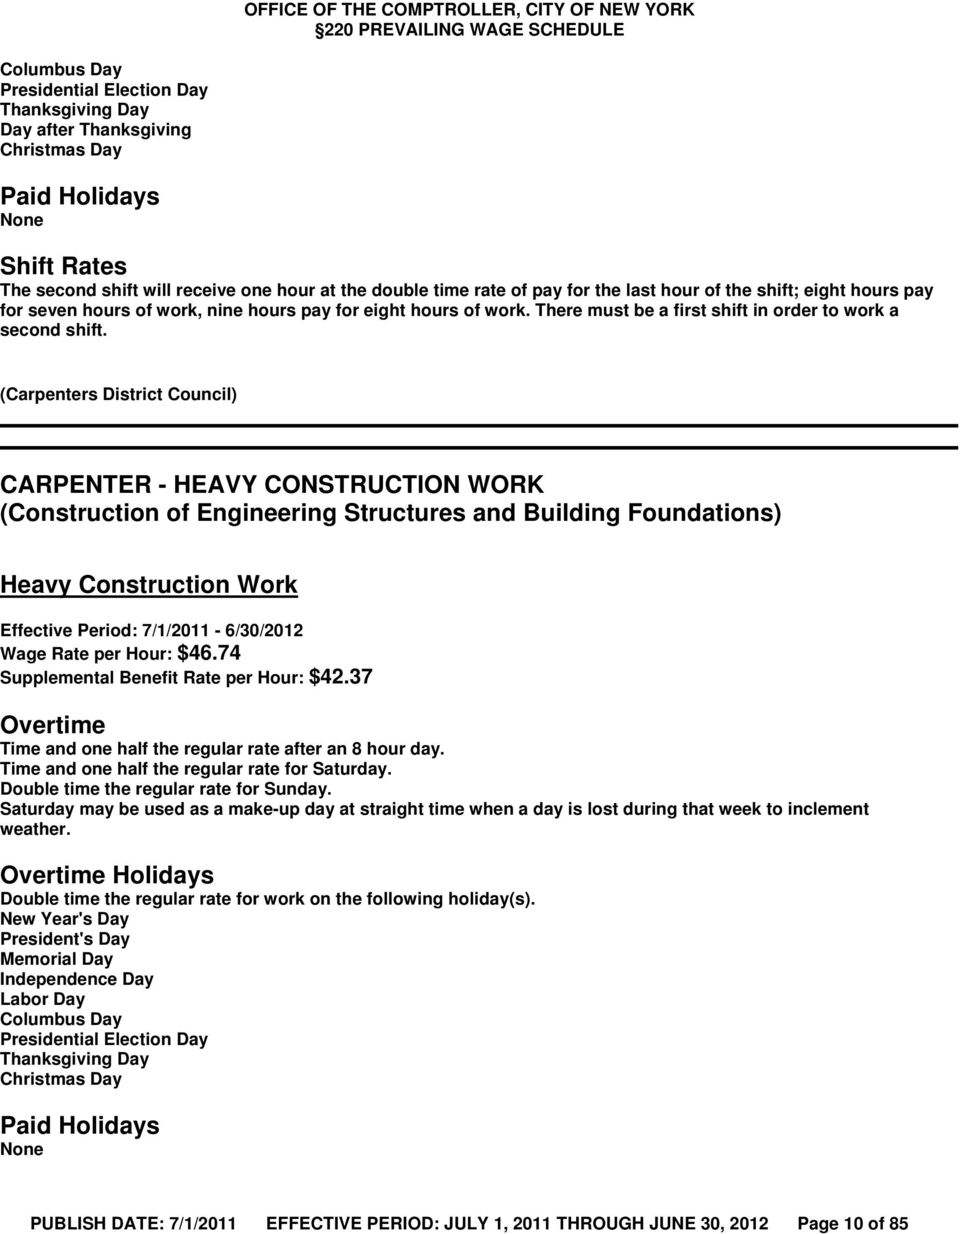 (Carpenters District Council) CARPENTER - HEAVY CONSTRUCTION WORK (Construction of Engineering Structures and Building Foundations) Heavy Construction Work Wage Rate per Hour: $46.